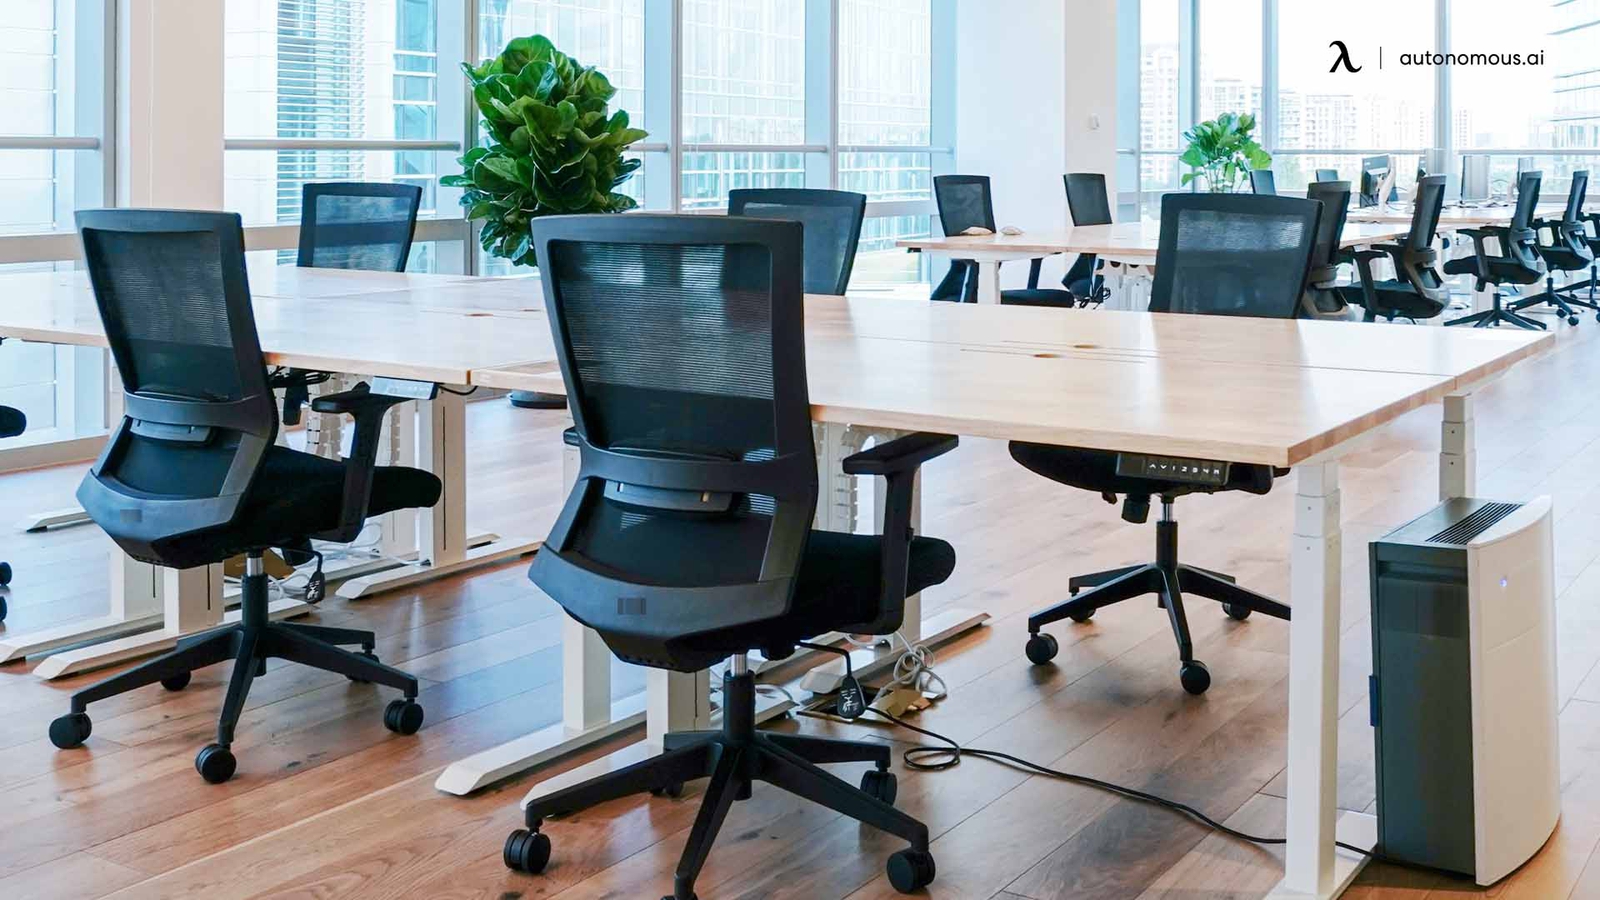 The 10 Best Ergonomic Office Chair Options Under $200 of 2023